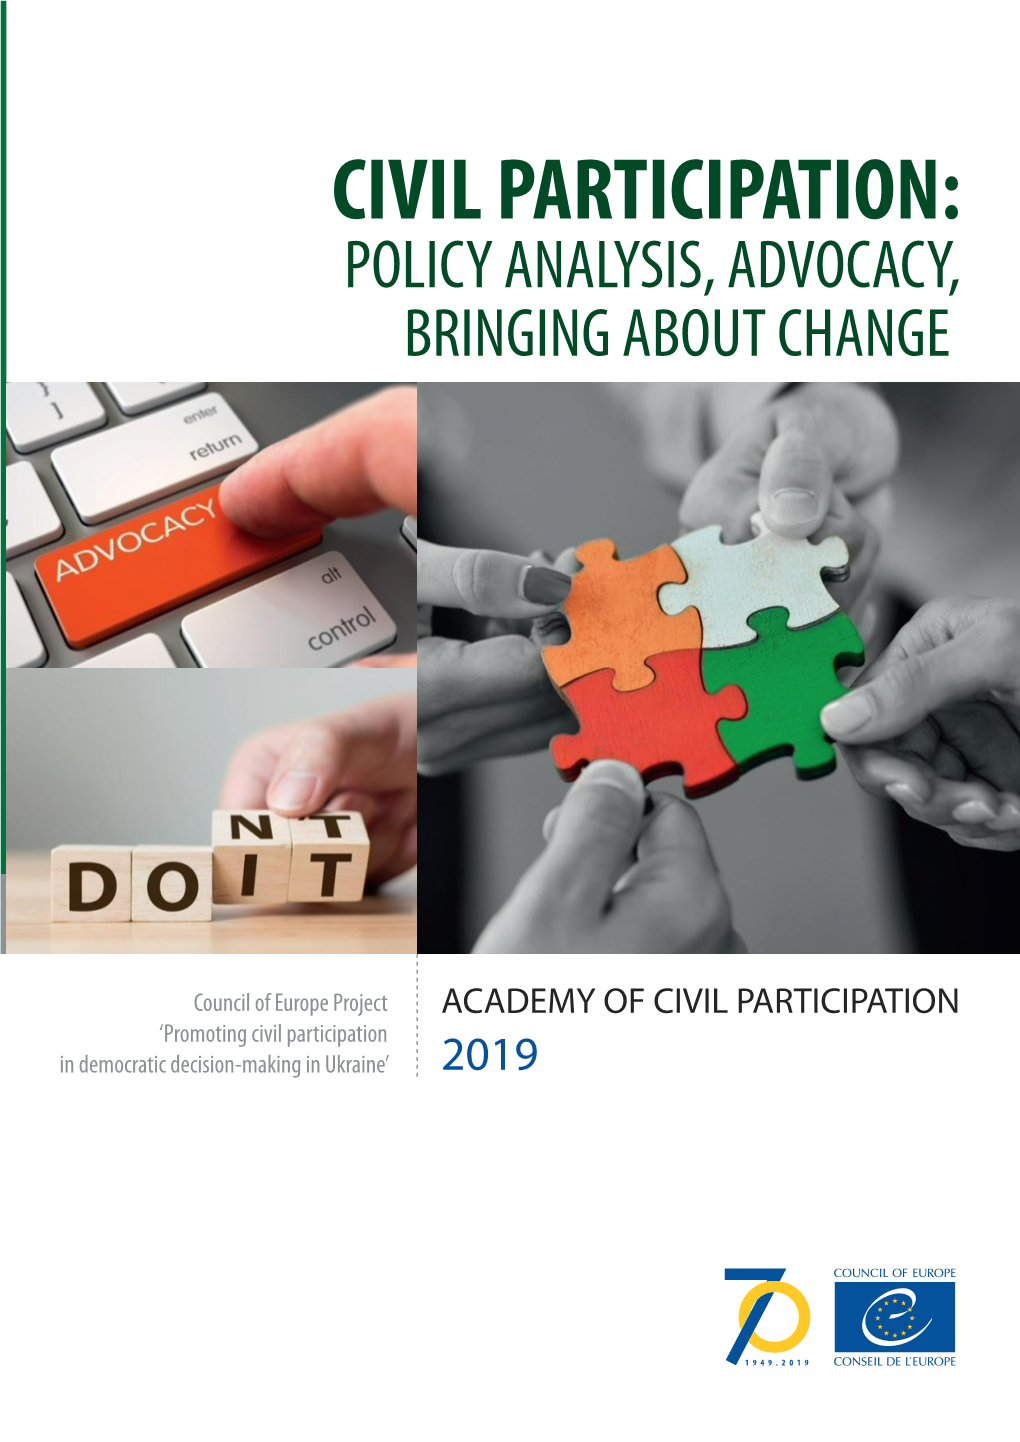 Policy Analysis, Advocacy, Bringing About Change